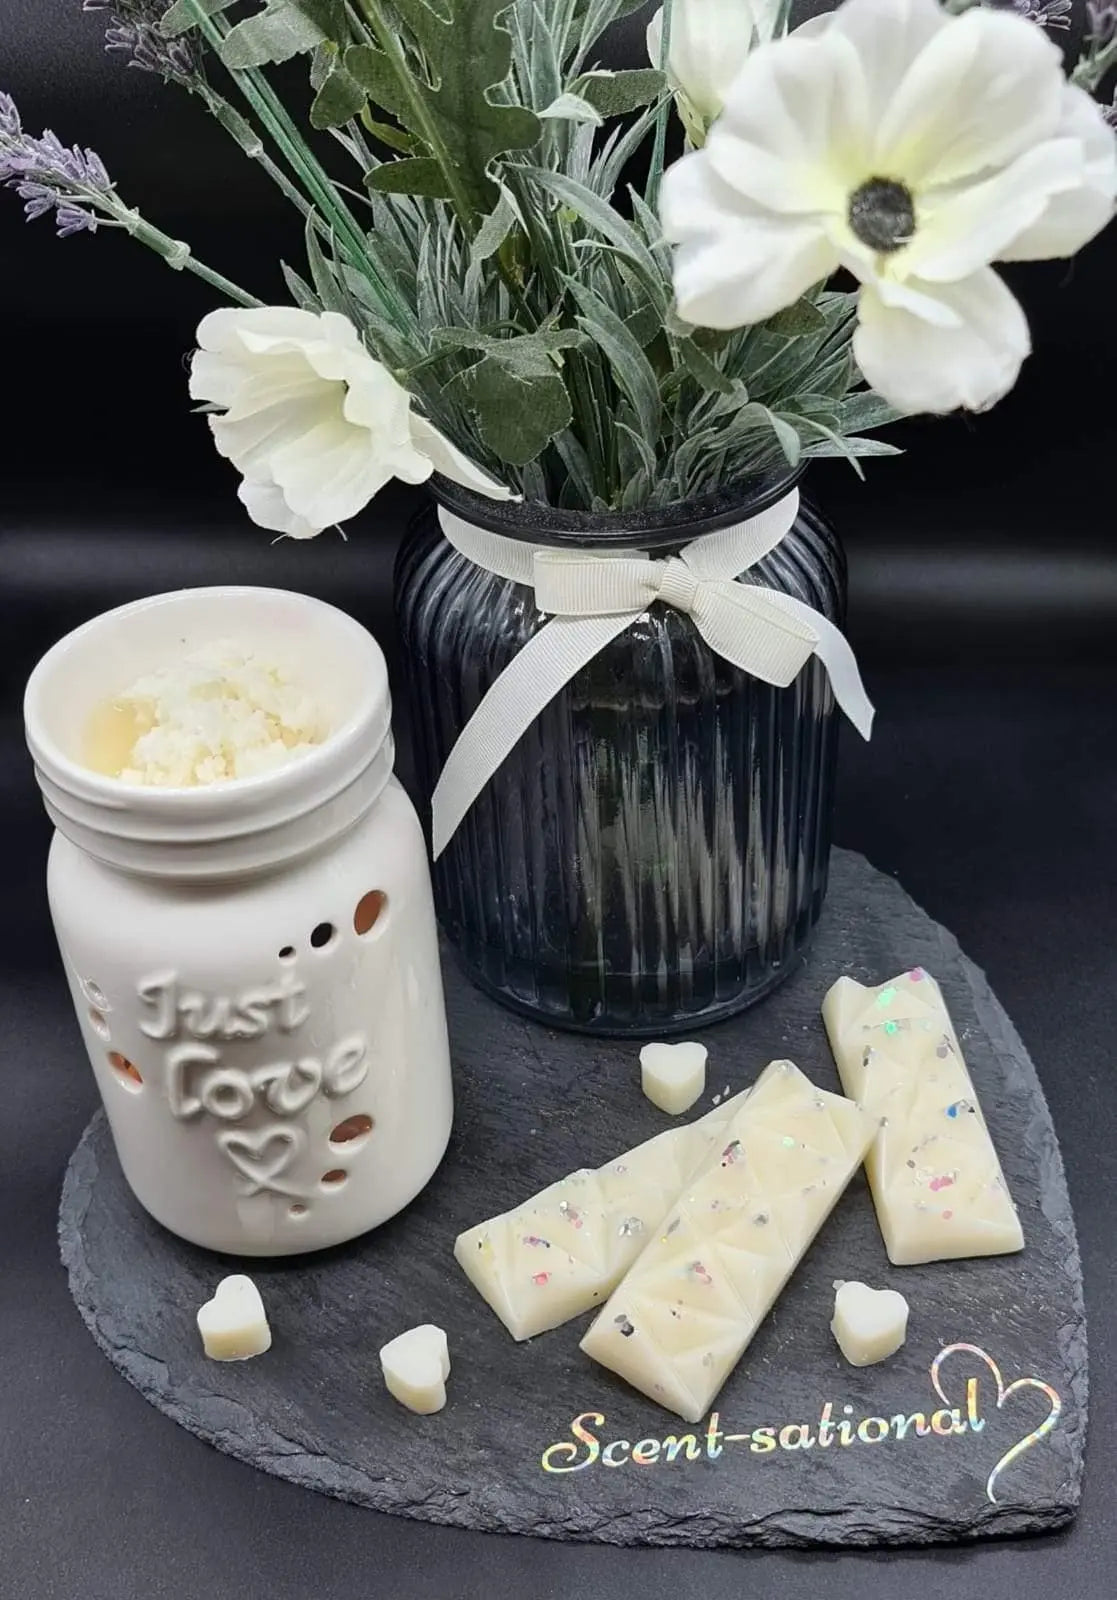 White Dove Wax Melts Scent Sational Wax melts